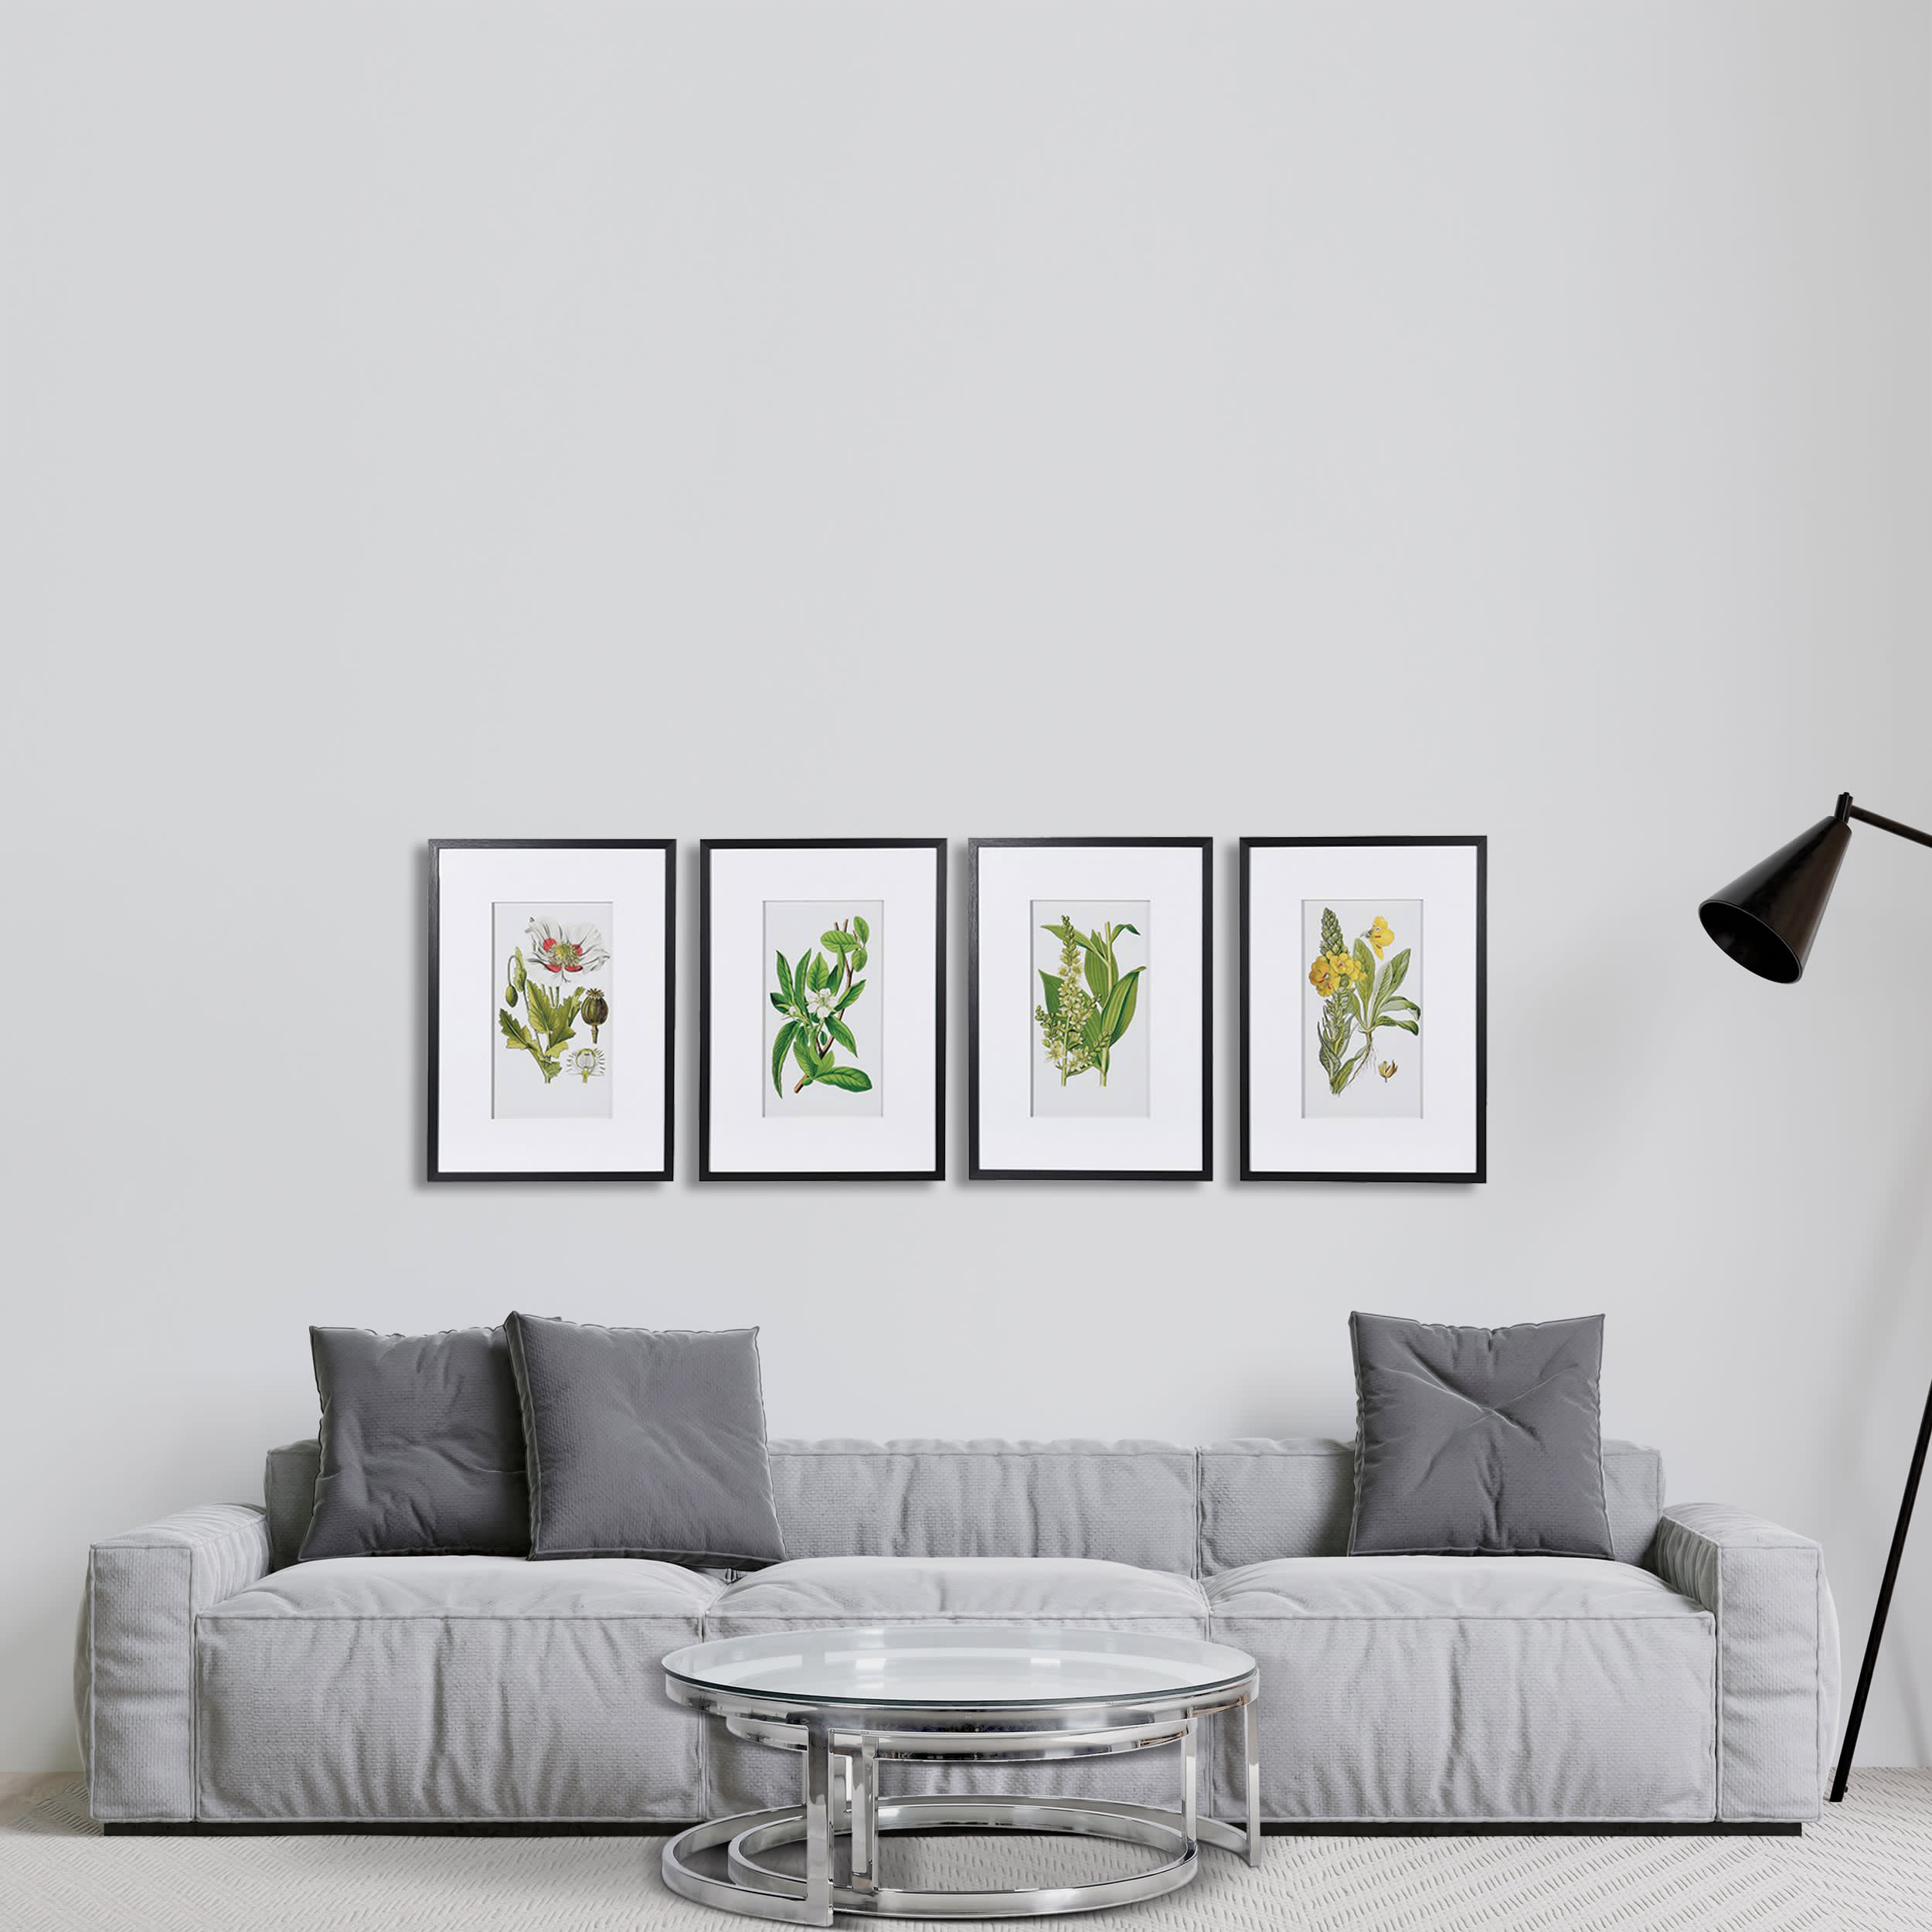 Set of 4 Botanical Garden Wall Pictures